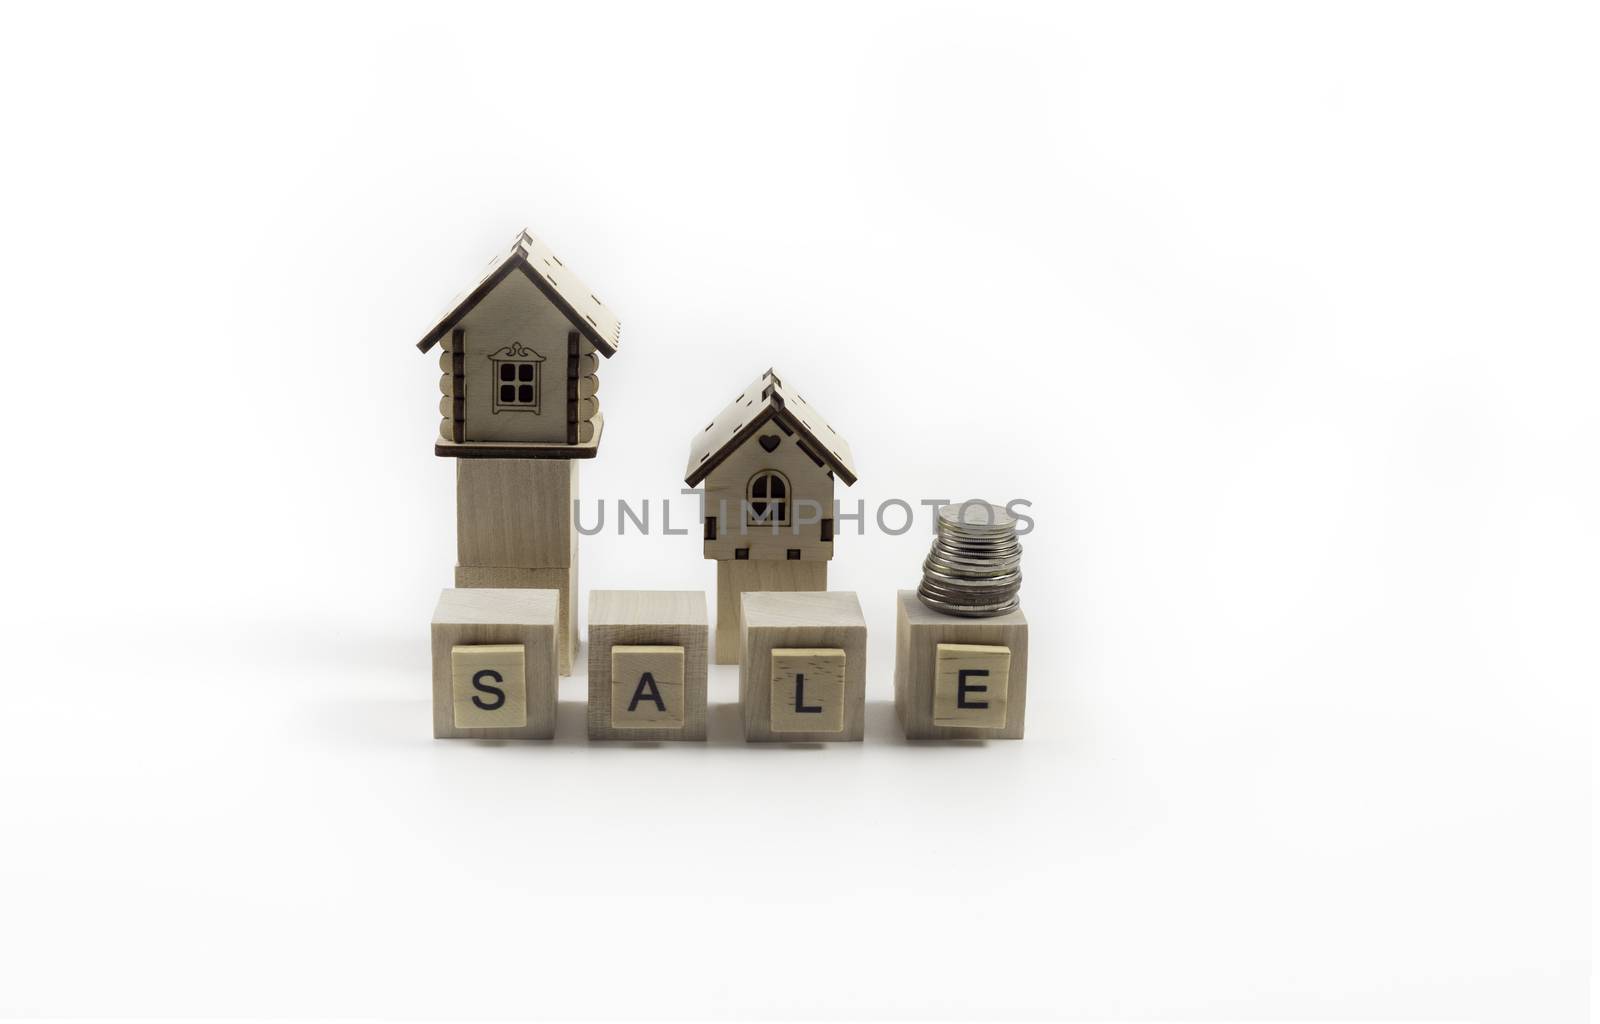 .Real Estate Sale Small Toy Wooden Houses and Sale Lettering.